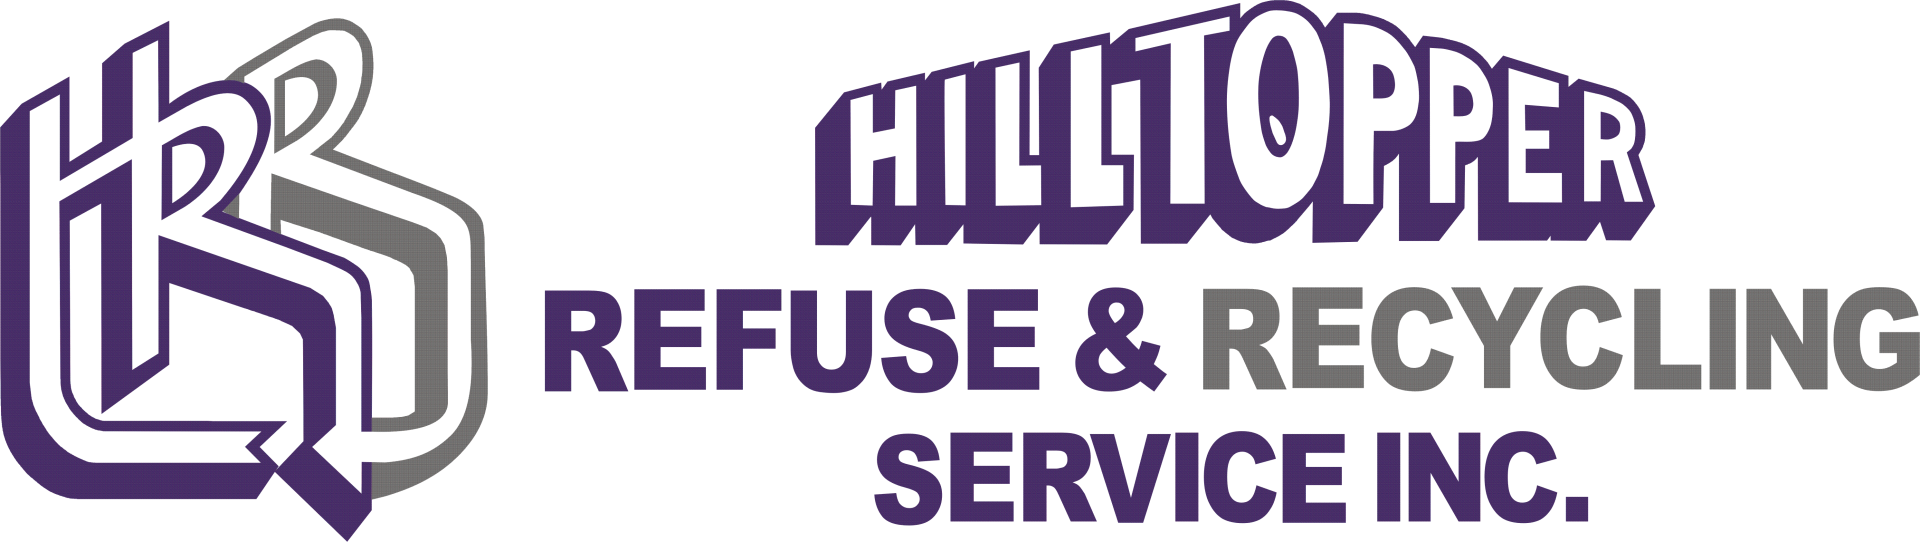 Hilltopper Refuse & Recycling Service Inc/Office Recycling Center